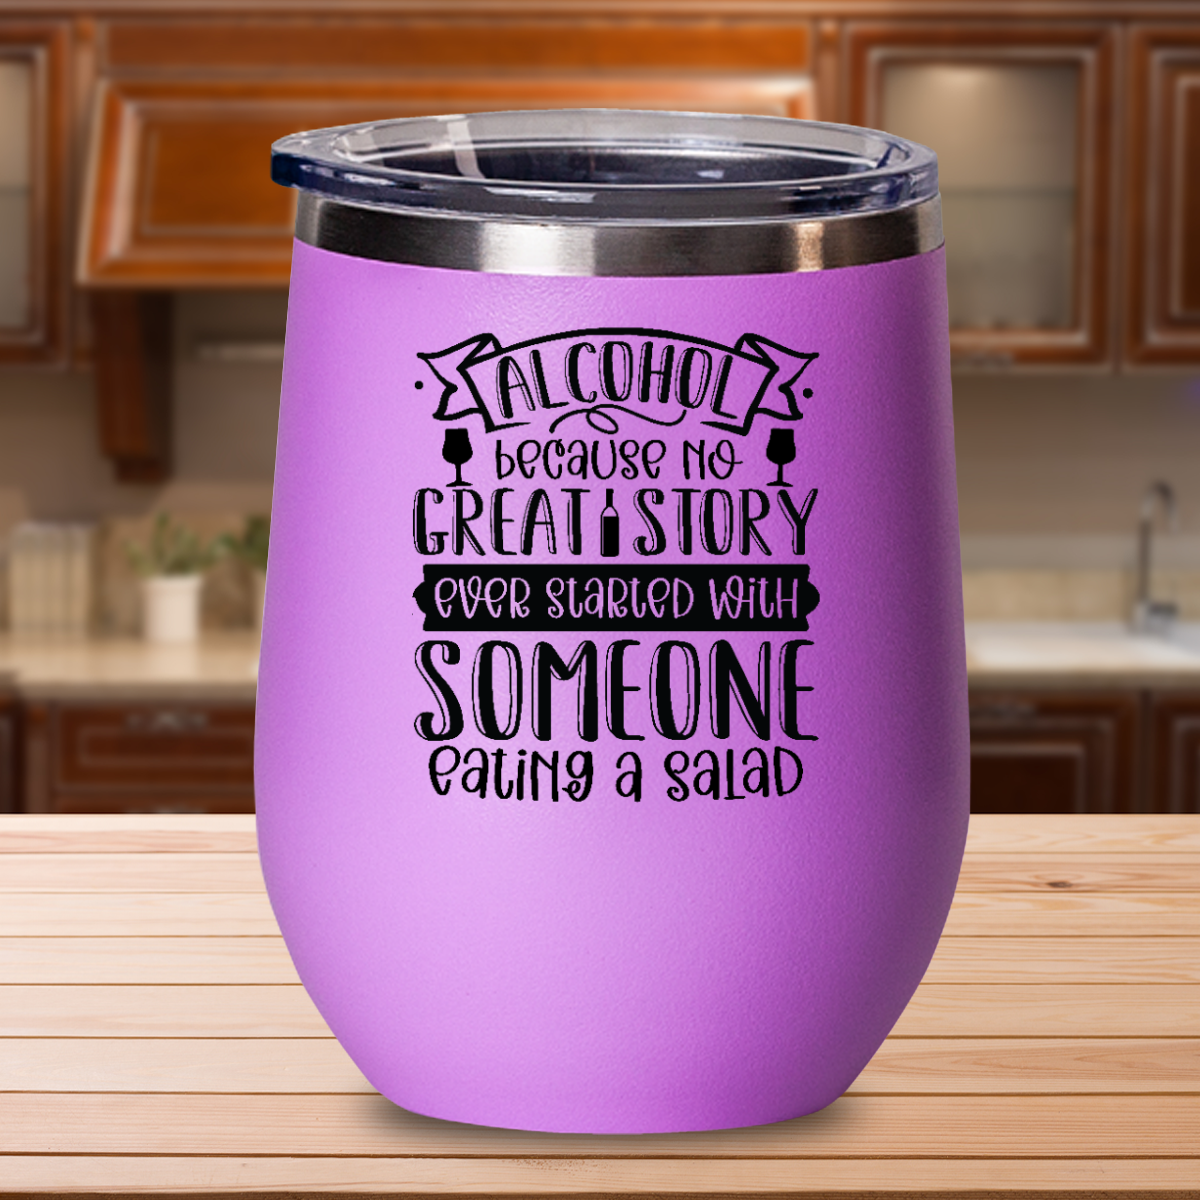 Alcohol Because No Great Story Every Started With Someone Eating A Salad - 12oz Stainless Steel Insulated Wine Tumbler